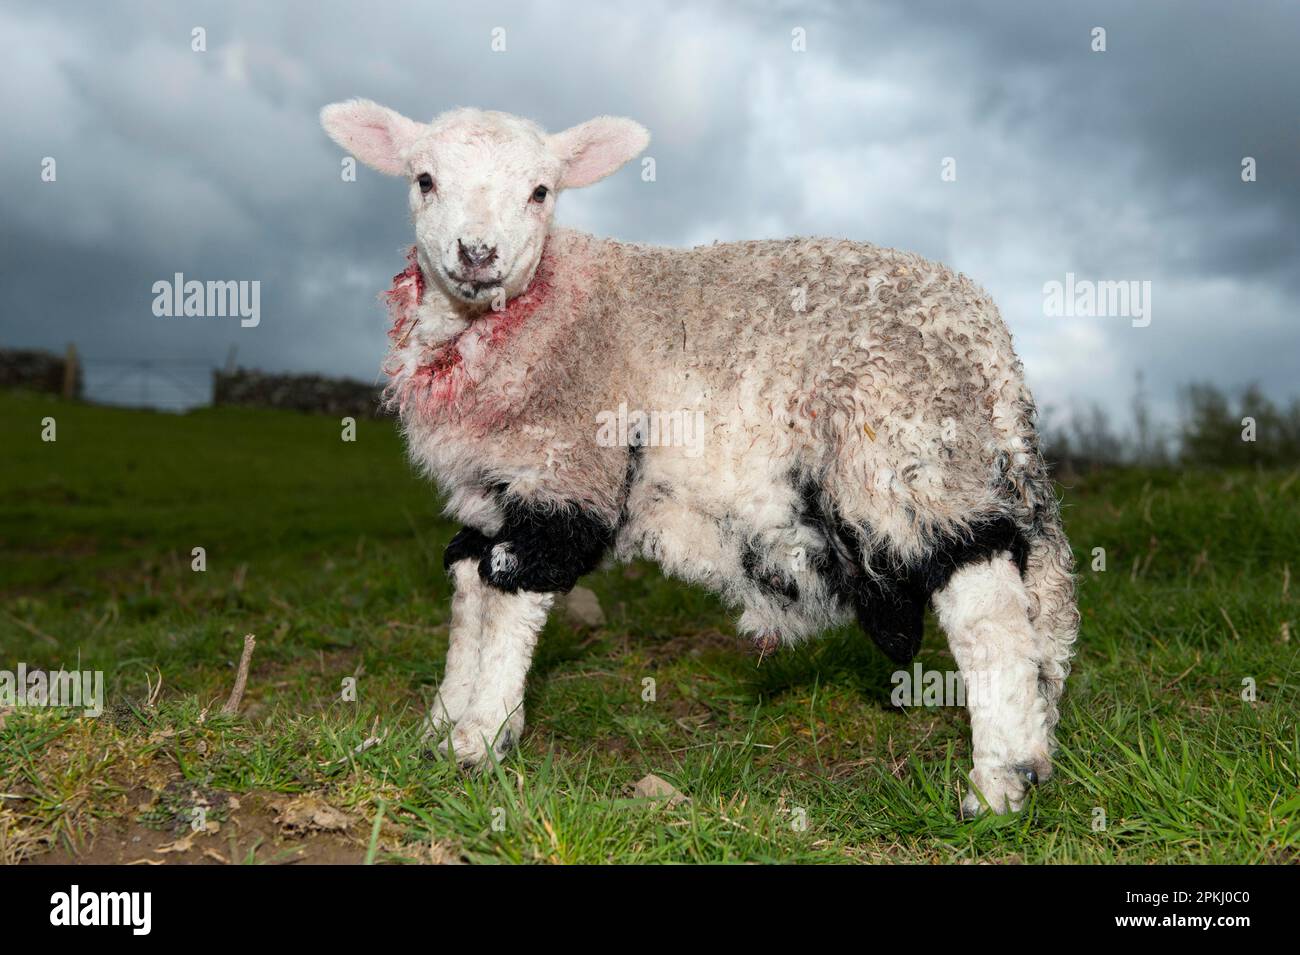 Domestic Sheep, lamb, wearing skin of dead lamb, method used to adopt orphan lamb onto ewe by disguising scent and promoting fostering, England Stock Photo